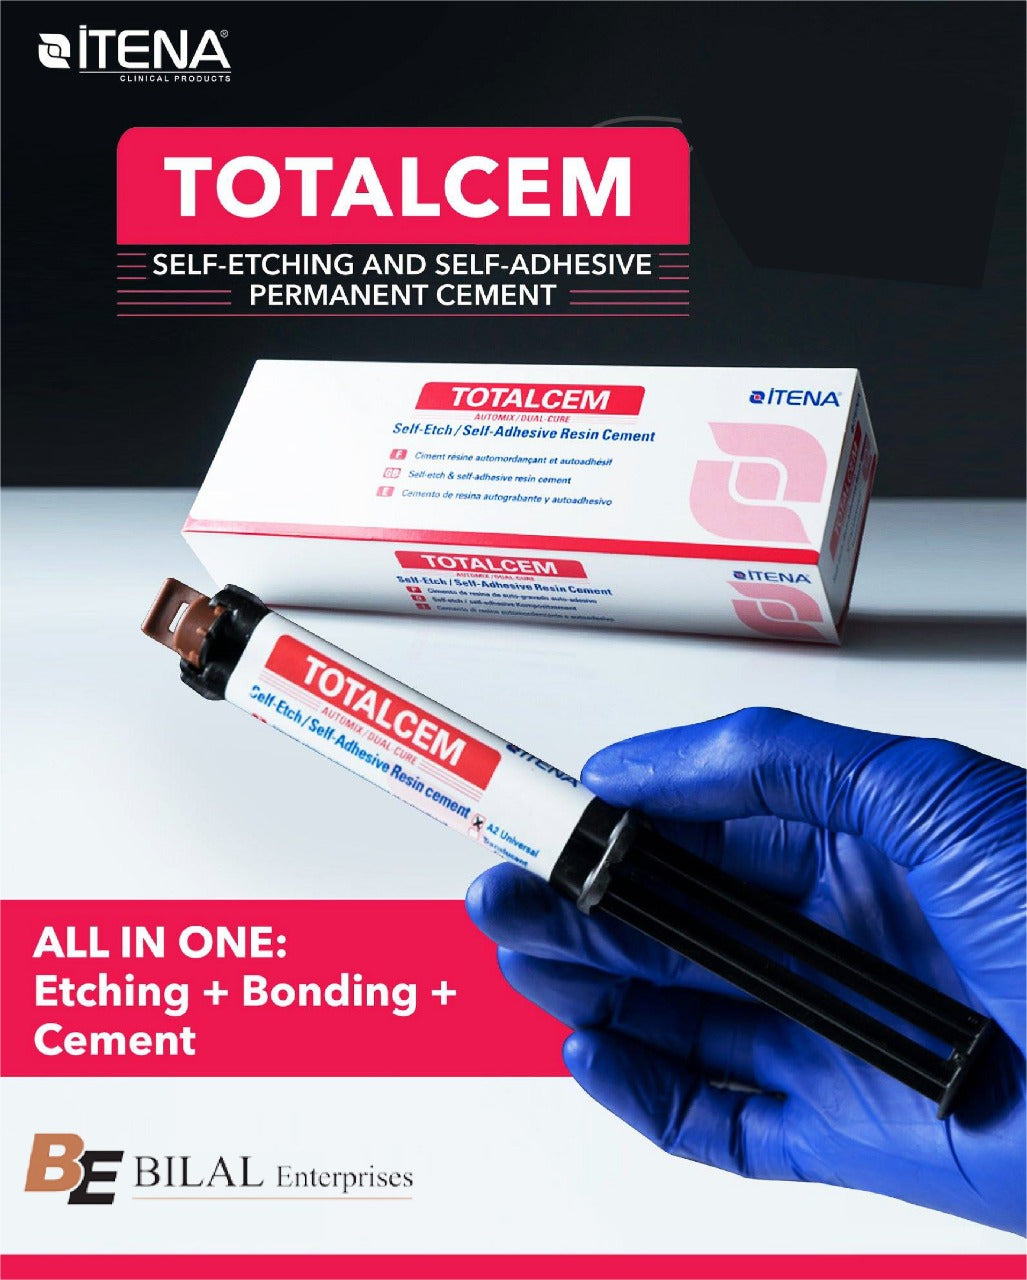 Itena Clinical - TotalCem (self-etching and self-adhesive permanent cement)